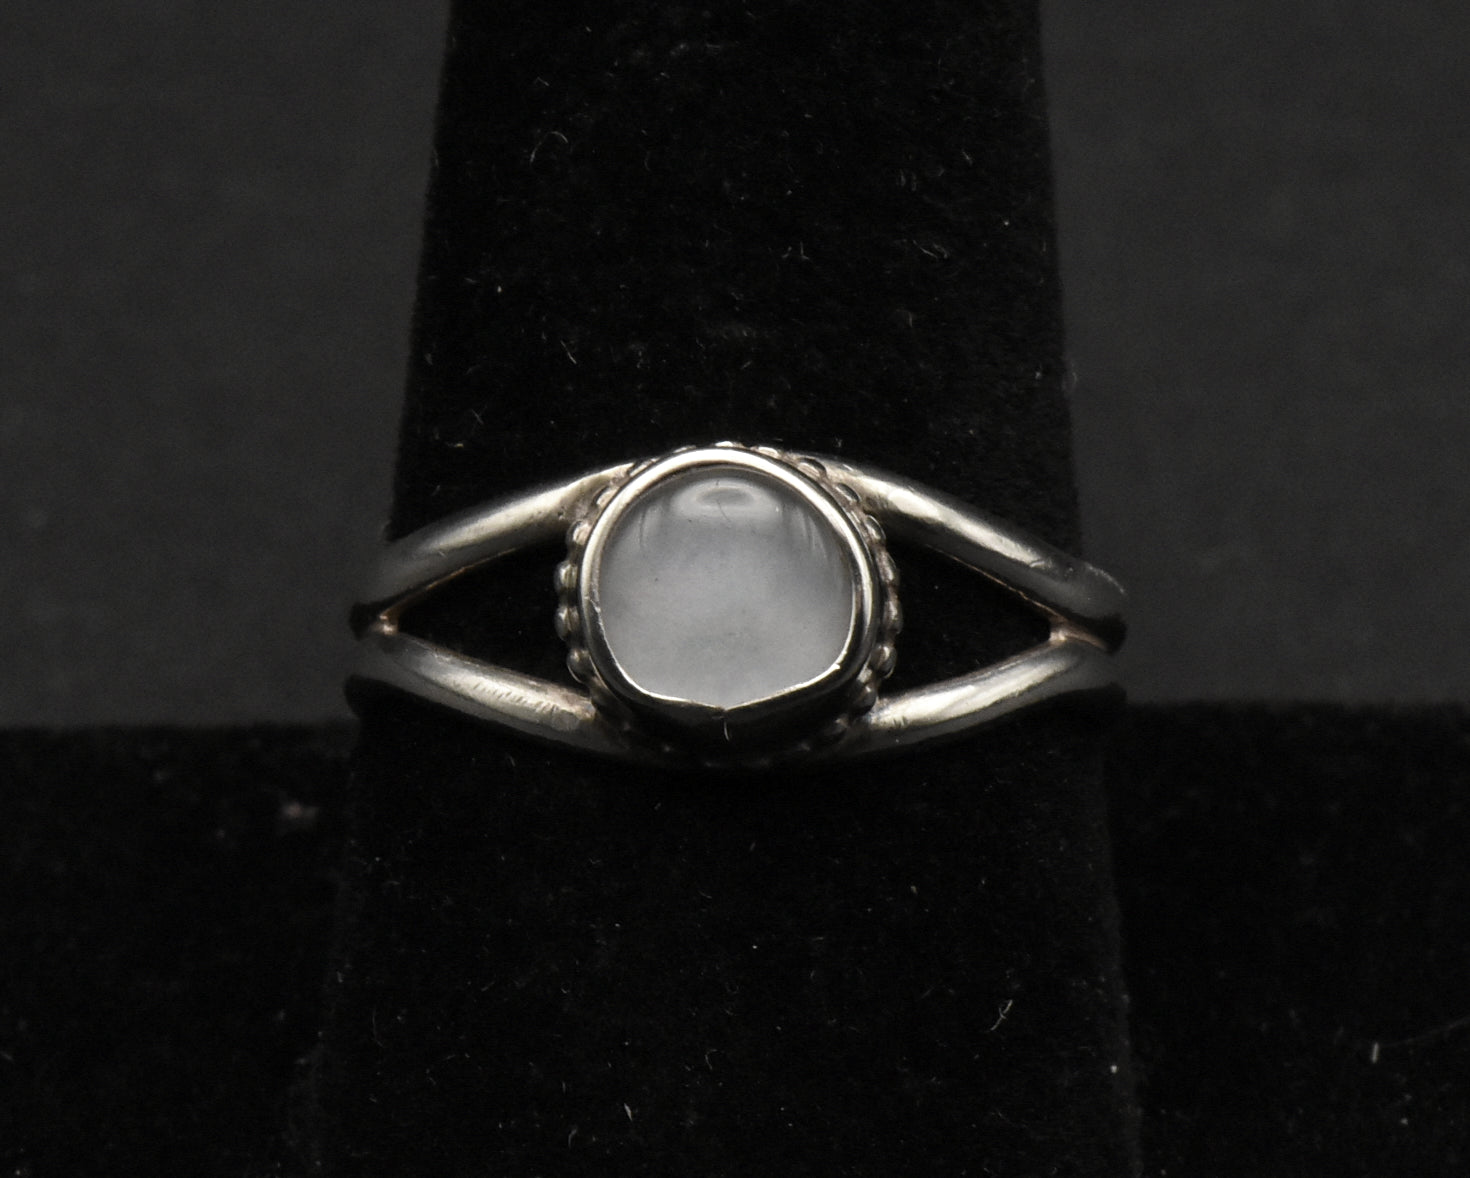 Vintage Sterling Silver Opal Ring - Size 9.75